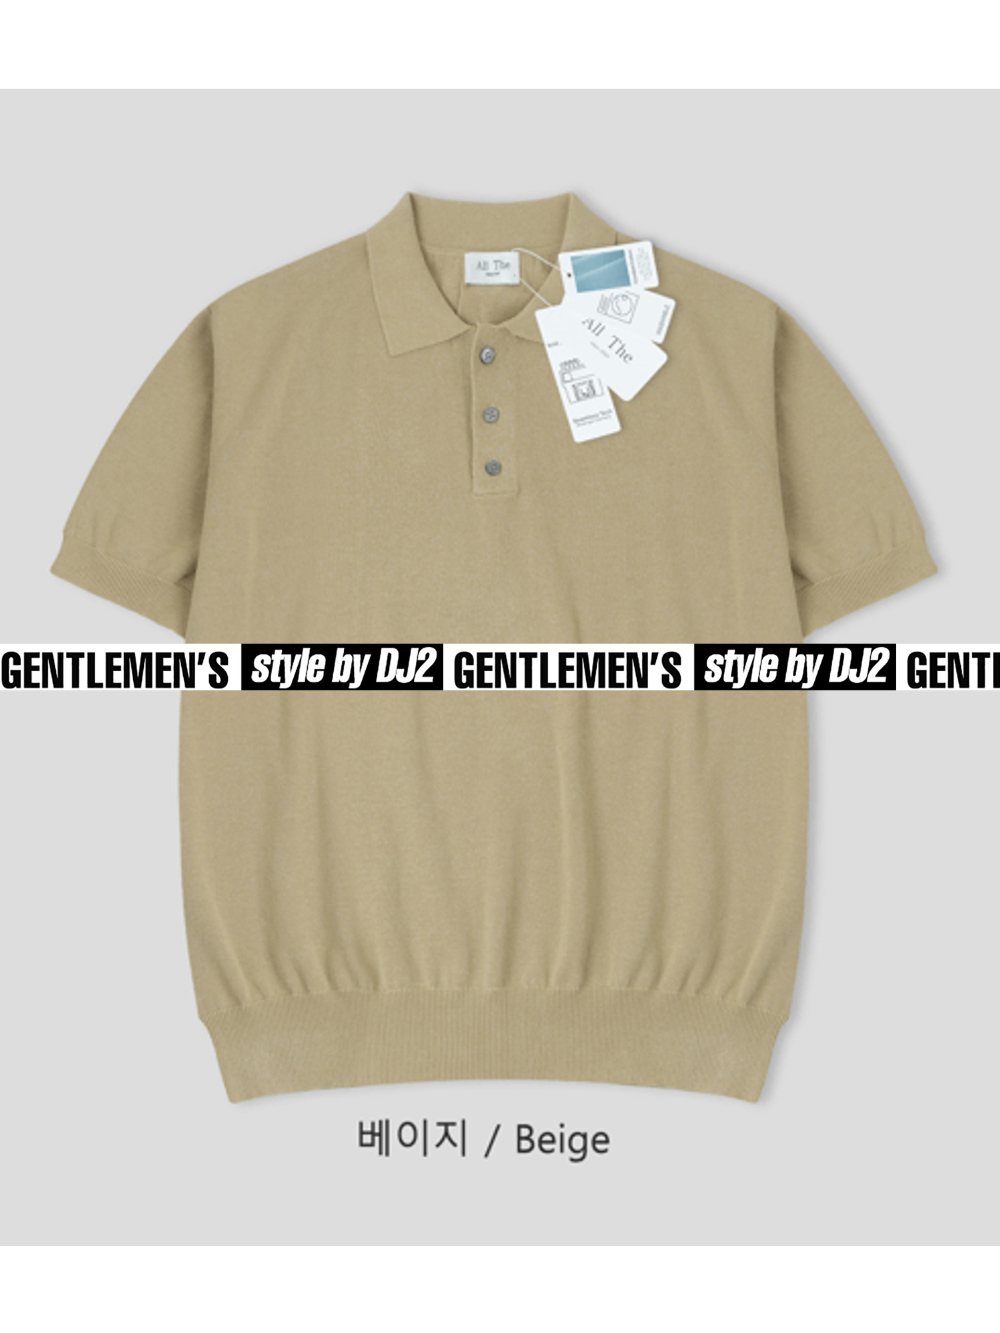 short sleeved tee cream color image-S2L2